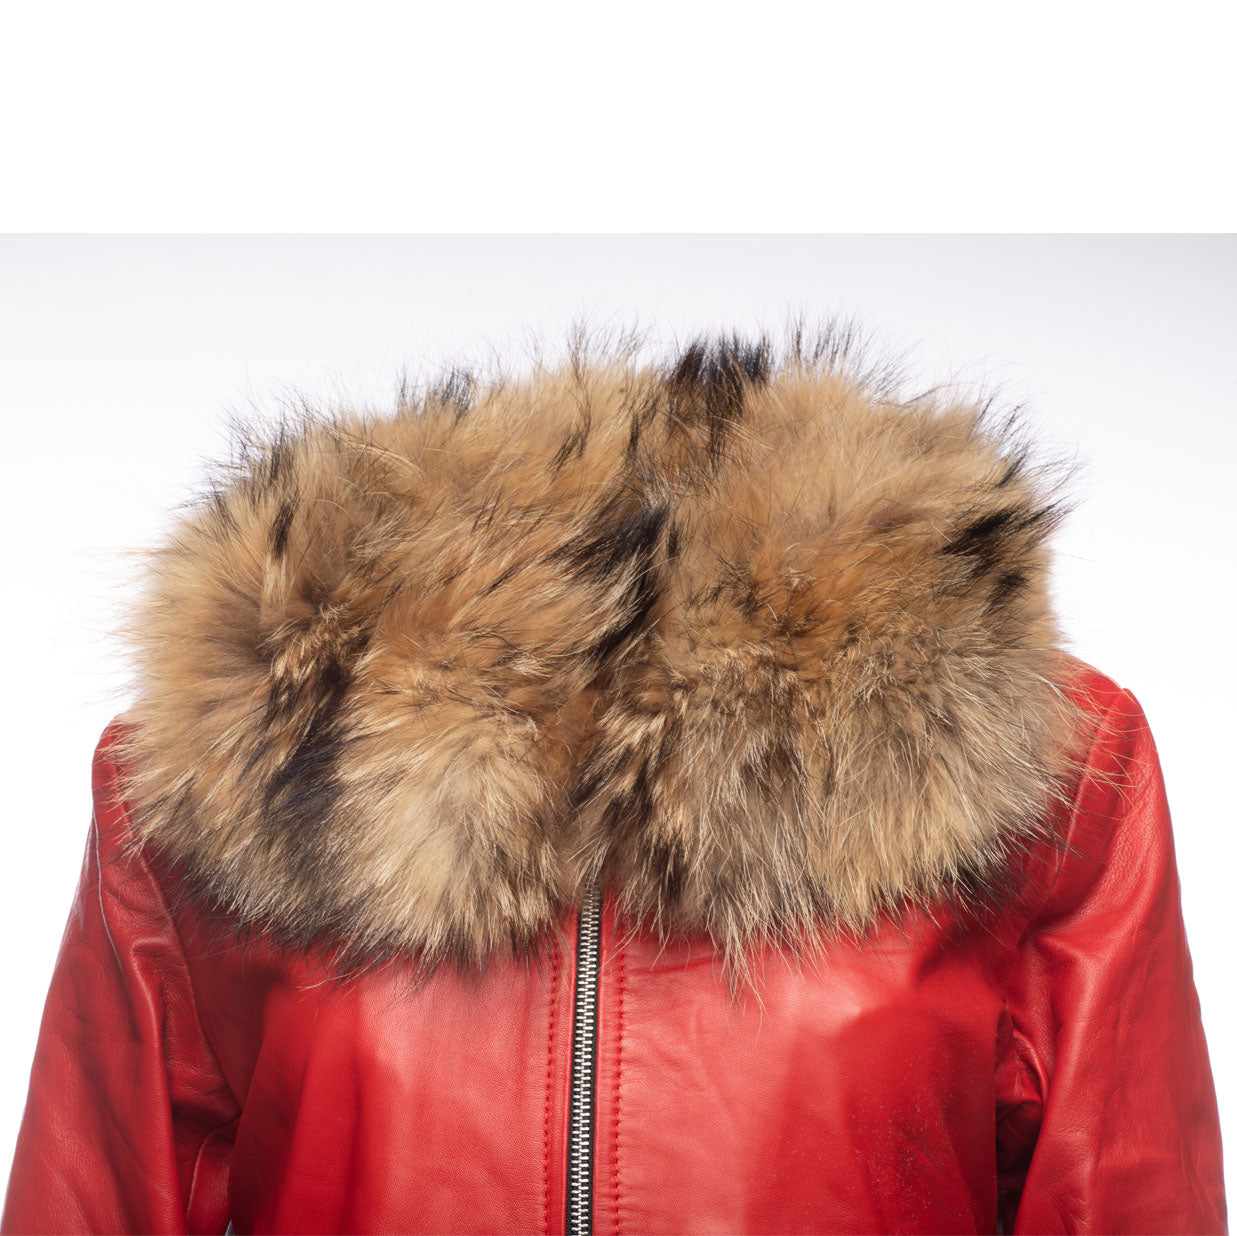 Palmyra Rose Red Leather Jacket With Fur Collar